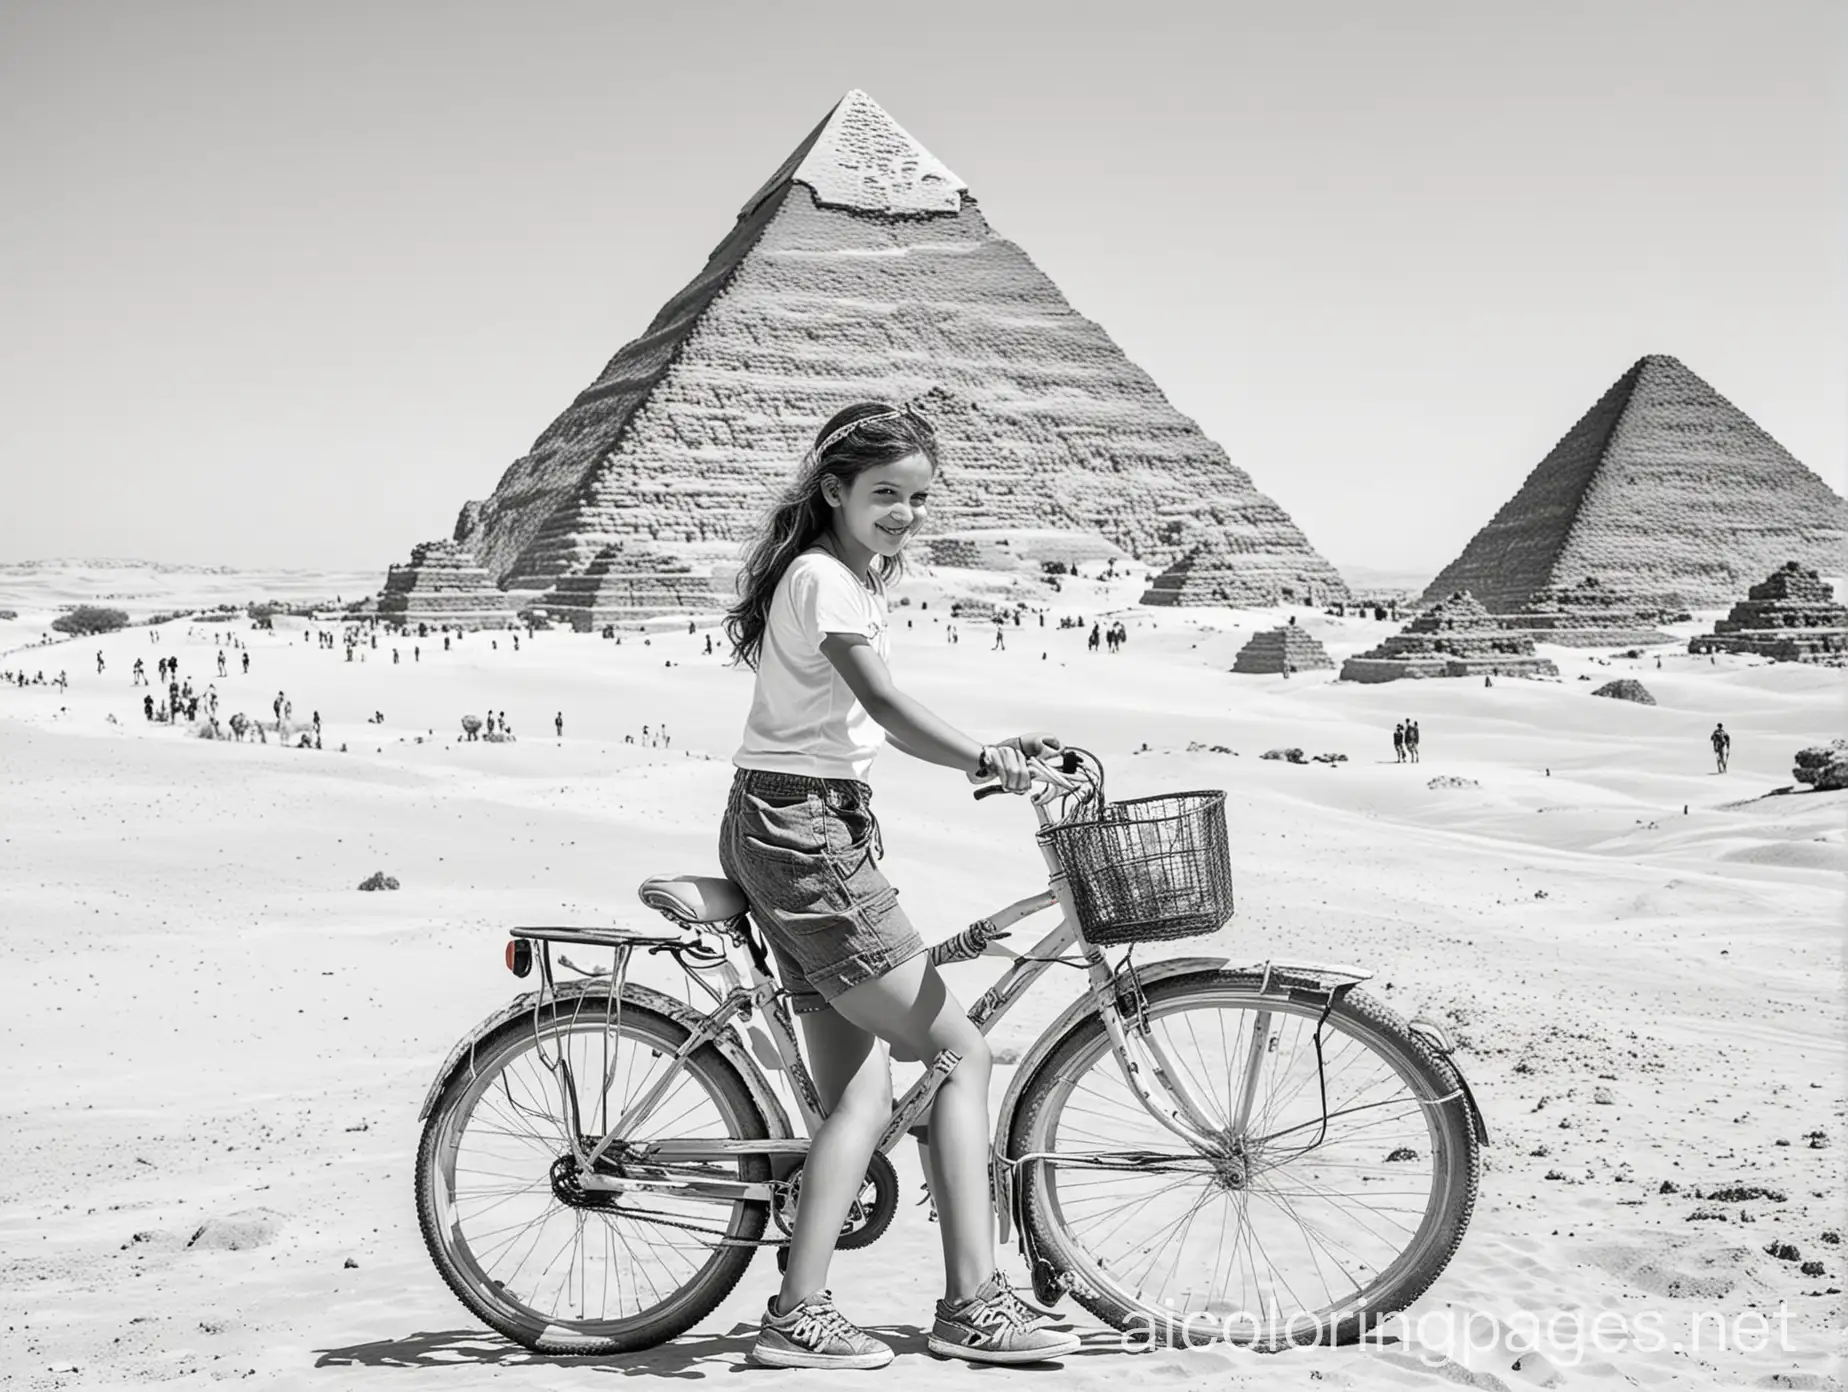 Girl-Riding-Bicycle-with-Egyptian-Pyramids-in-Background